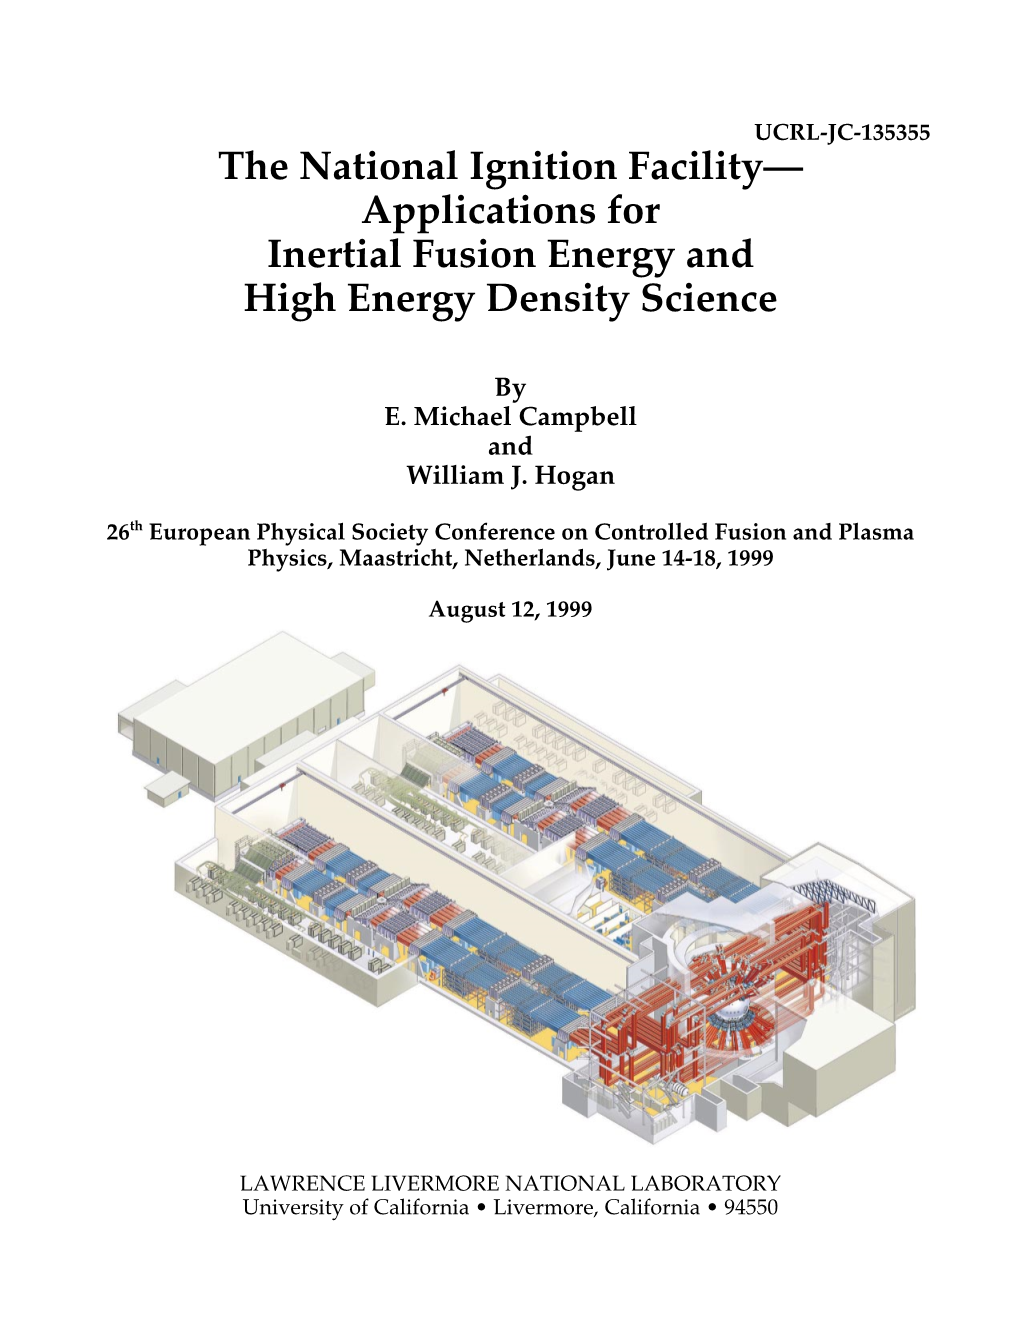 The National Ignition Facility— Applications for Inertial Fusion Energy and High Energy Density Science